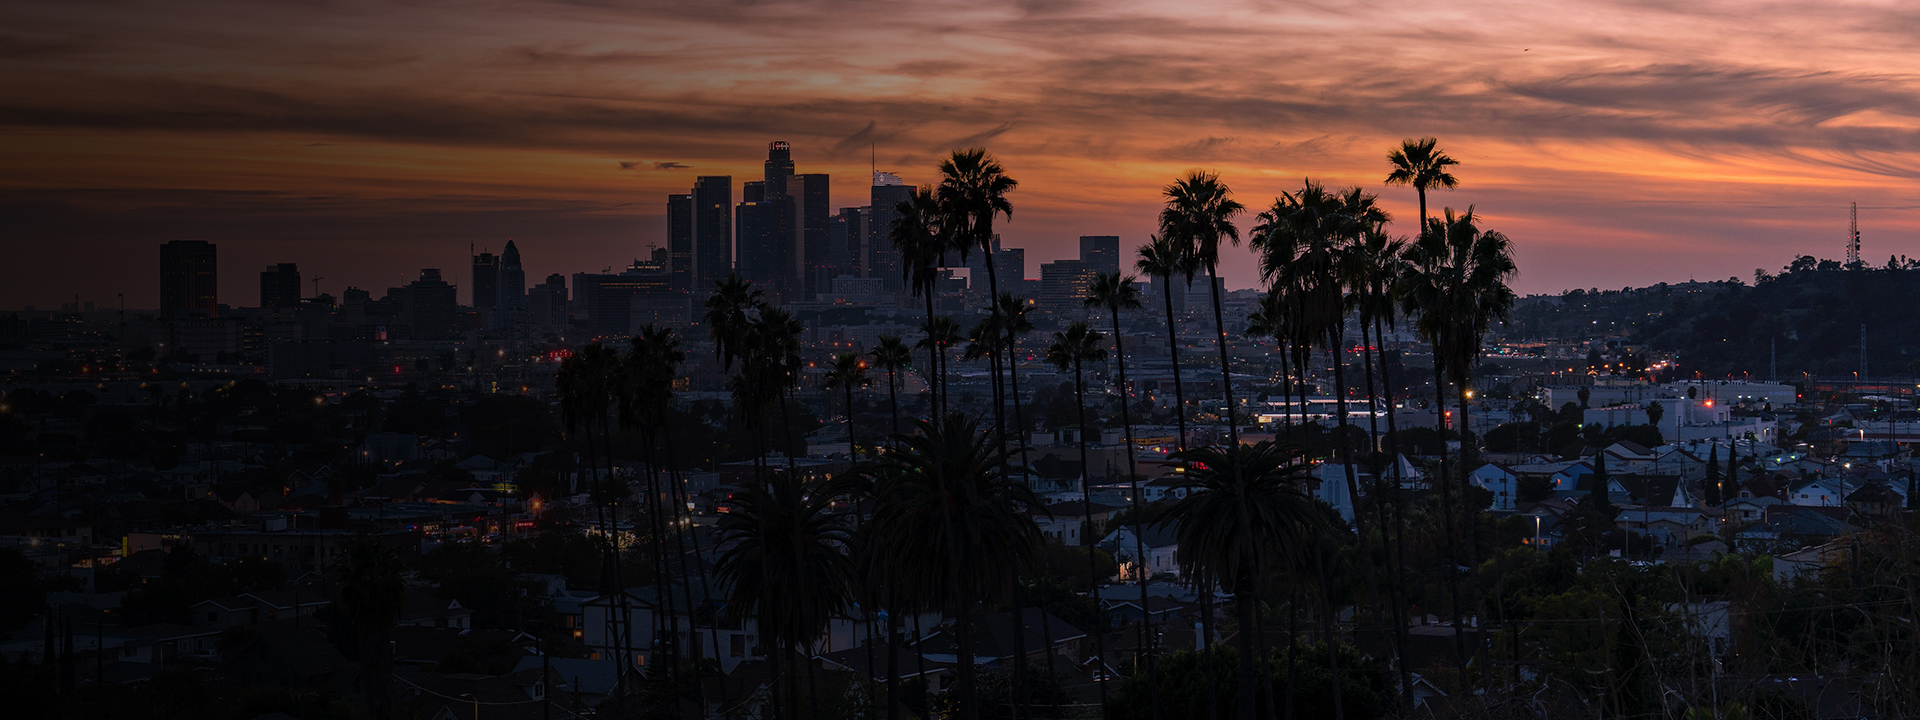 Sunset of skyline and palm trees inLos Angeles